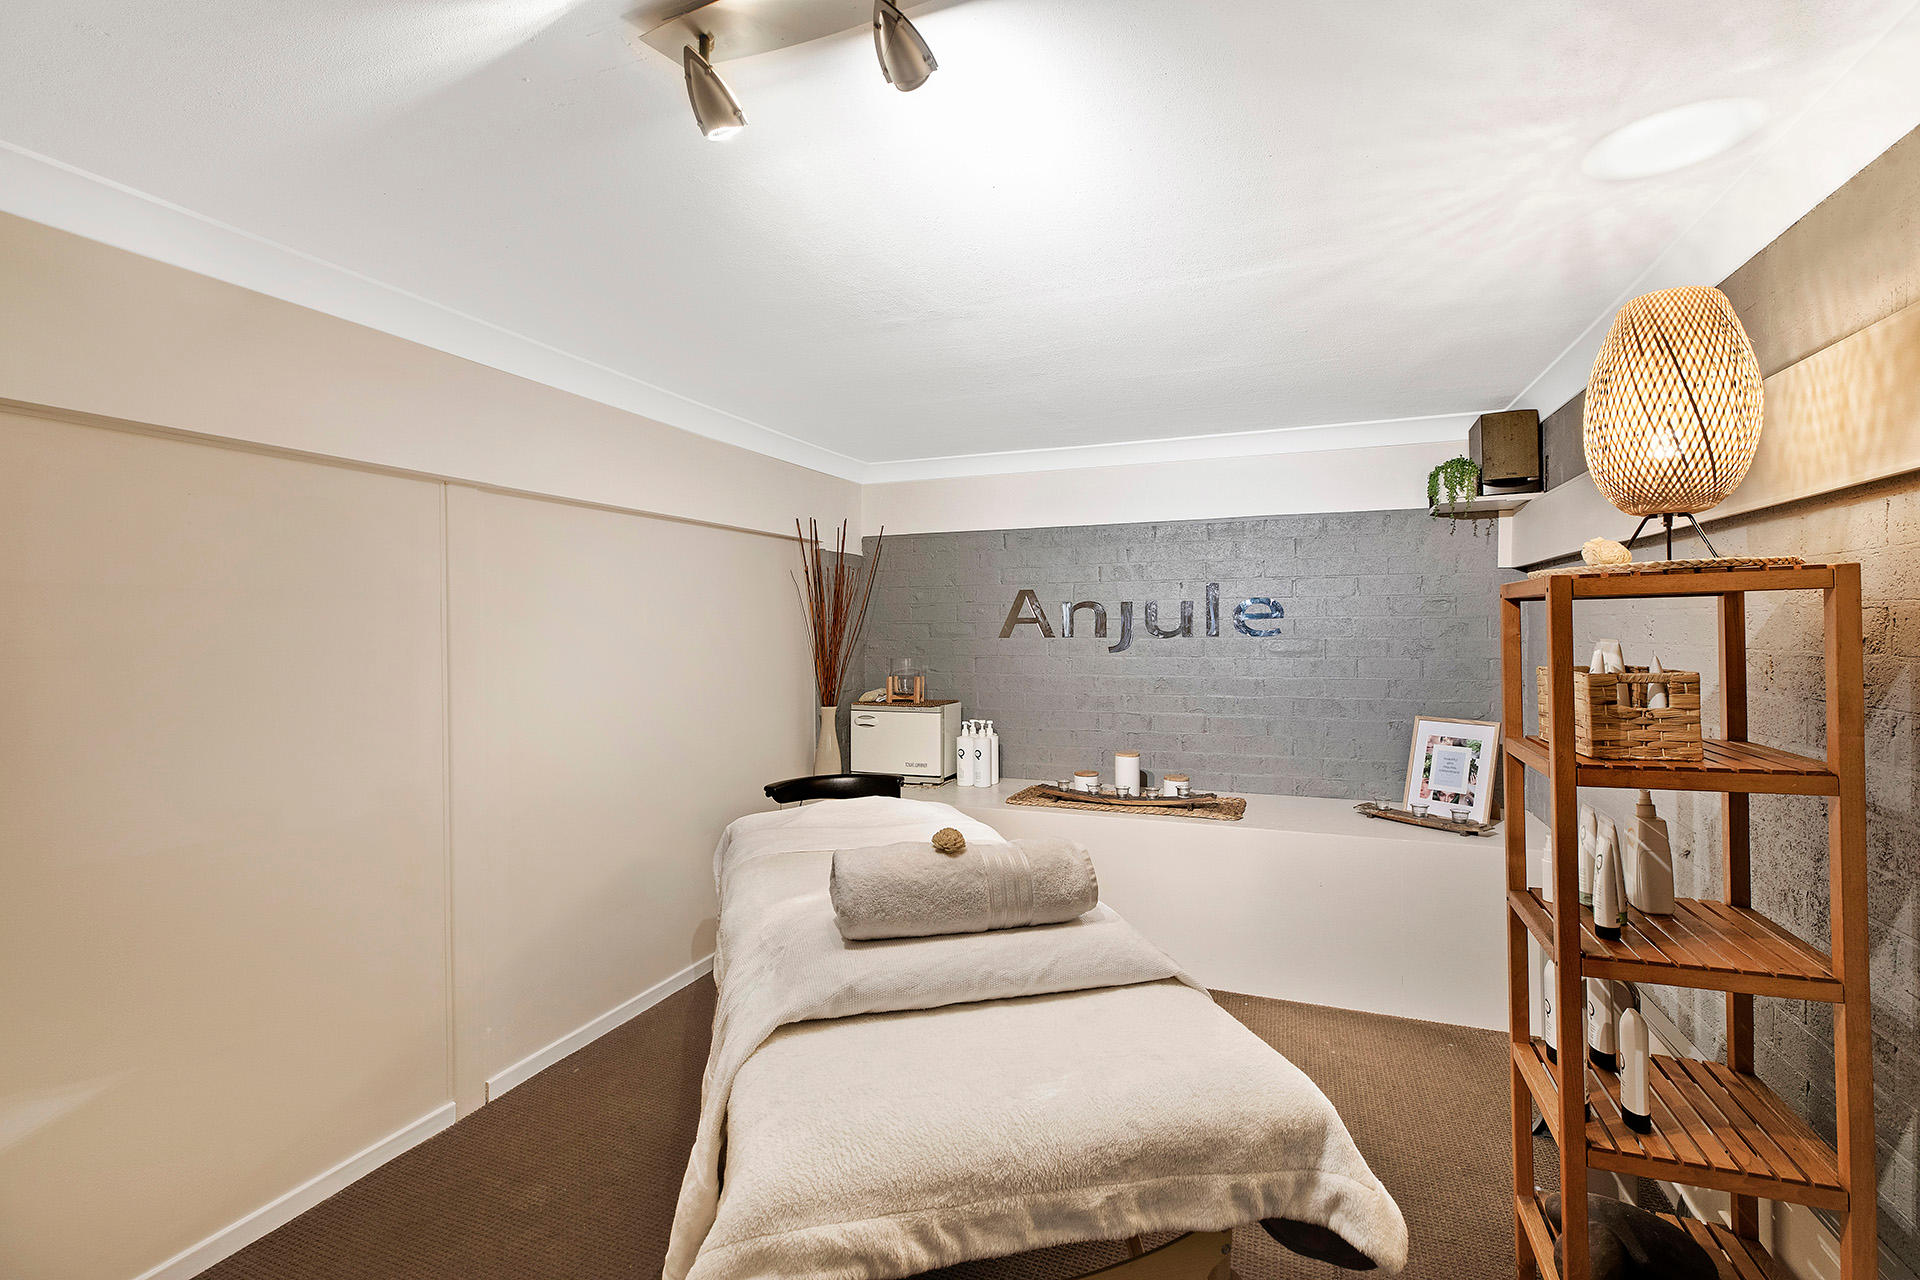 Images Anjule Beauty Therapy